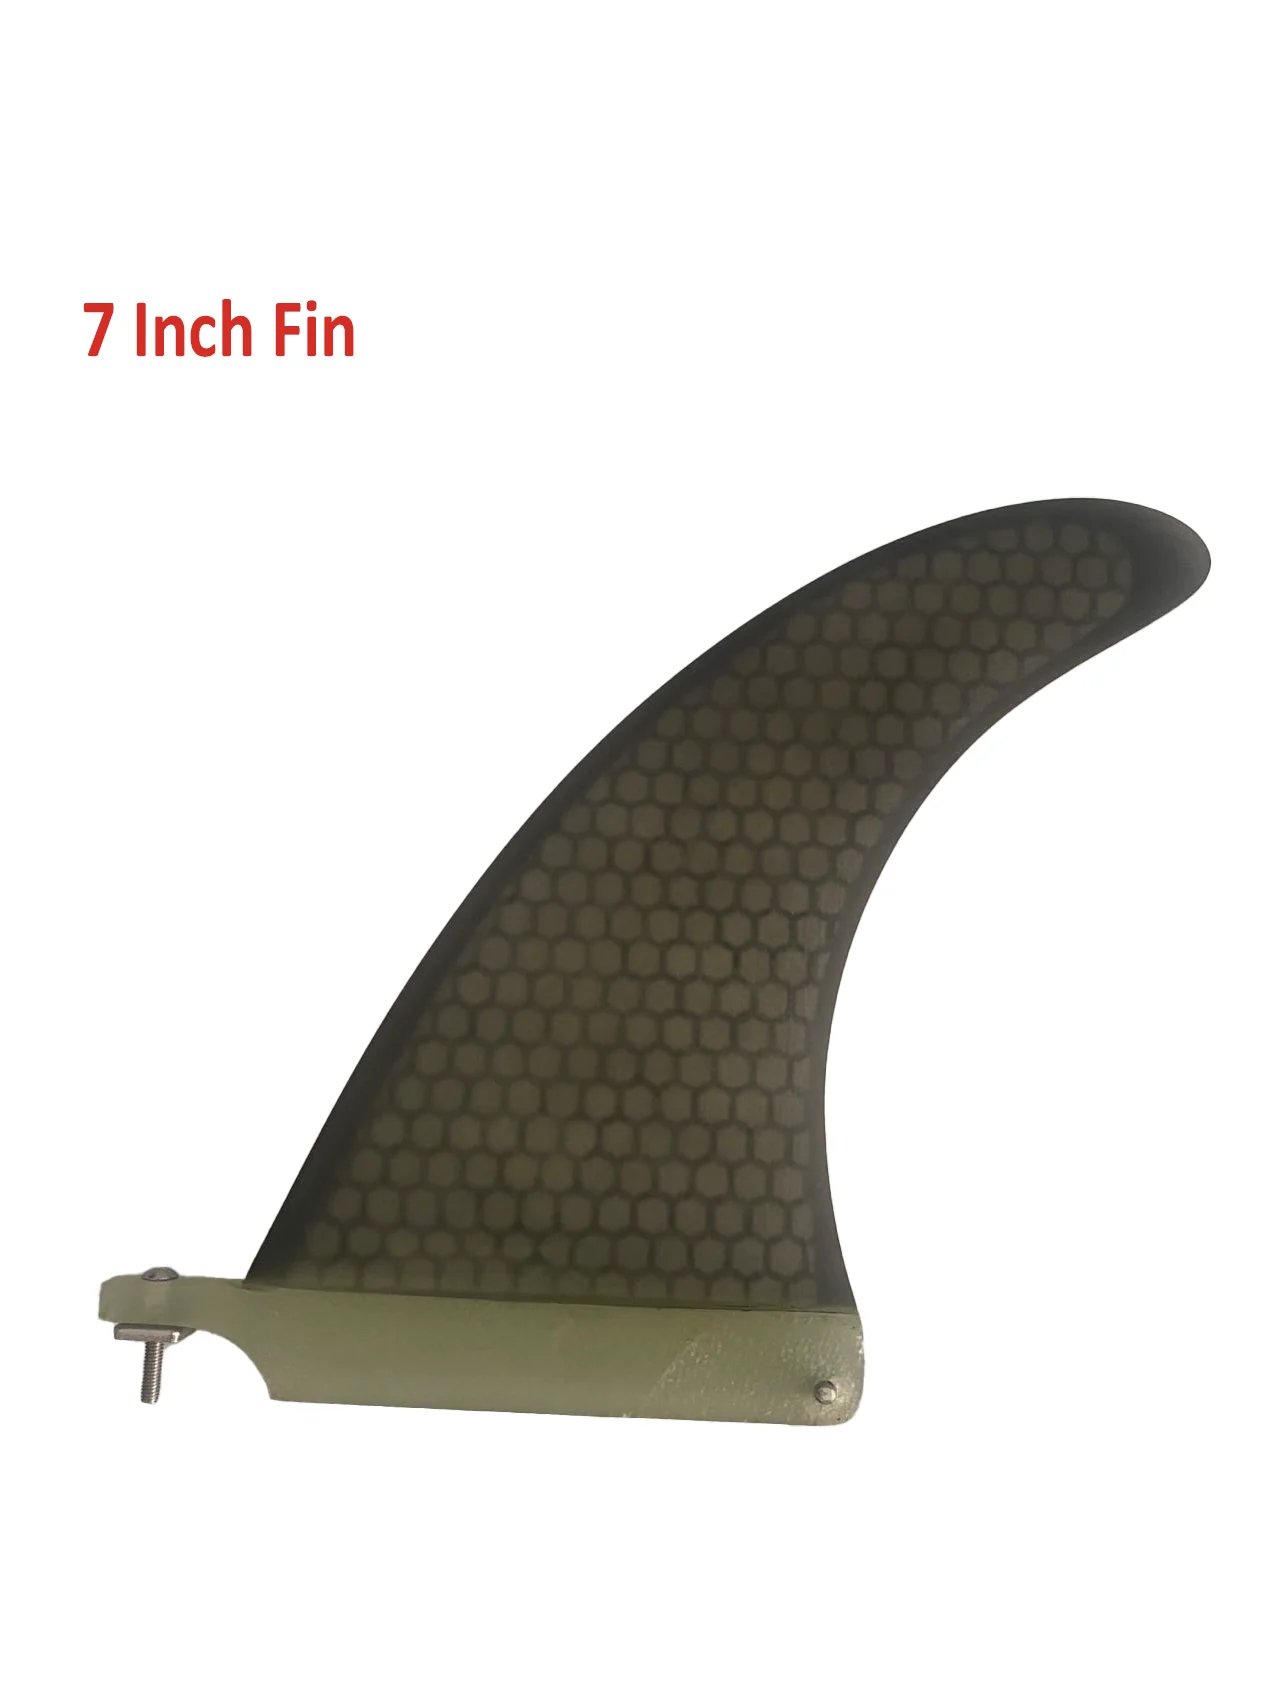 7/8/9/10 Inch Surf Fin Honeycomb Fiberglass SUP Board Fin For Surfboard Longboard Surfing Water Sport Accessories sup fin new style stand up paddle inflatable board surfboard central fin water sport